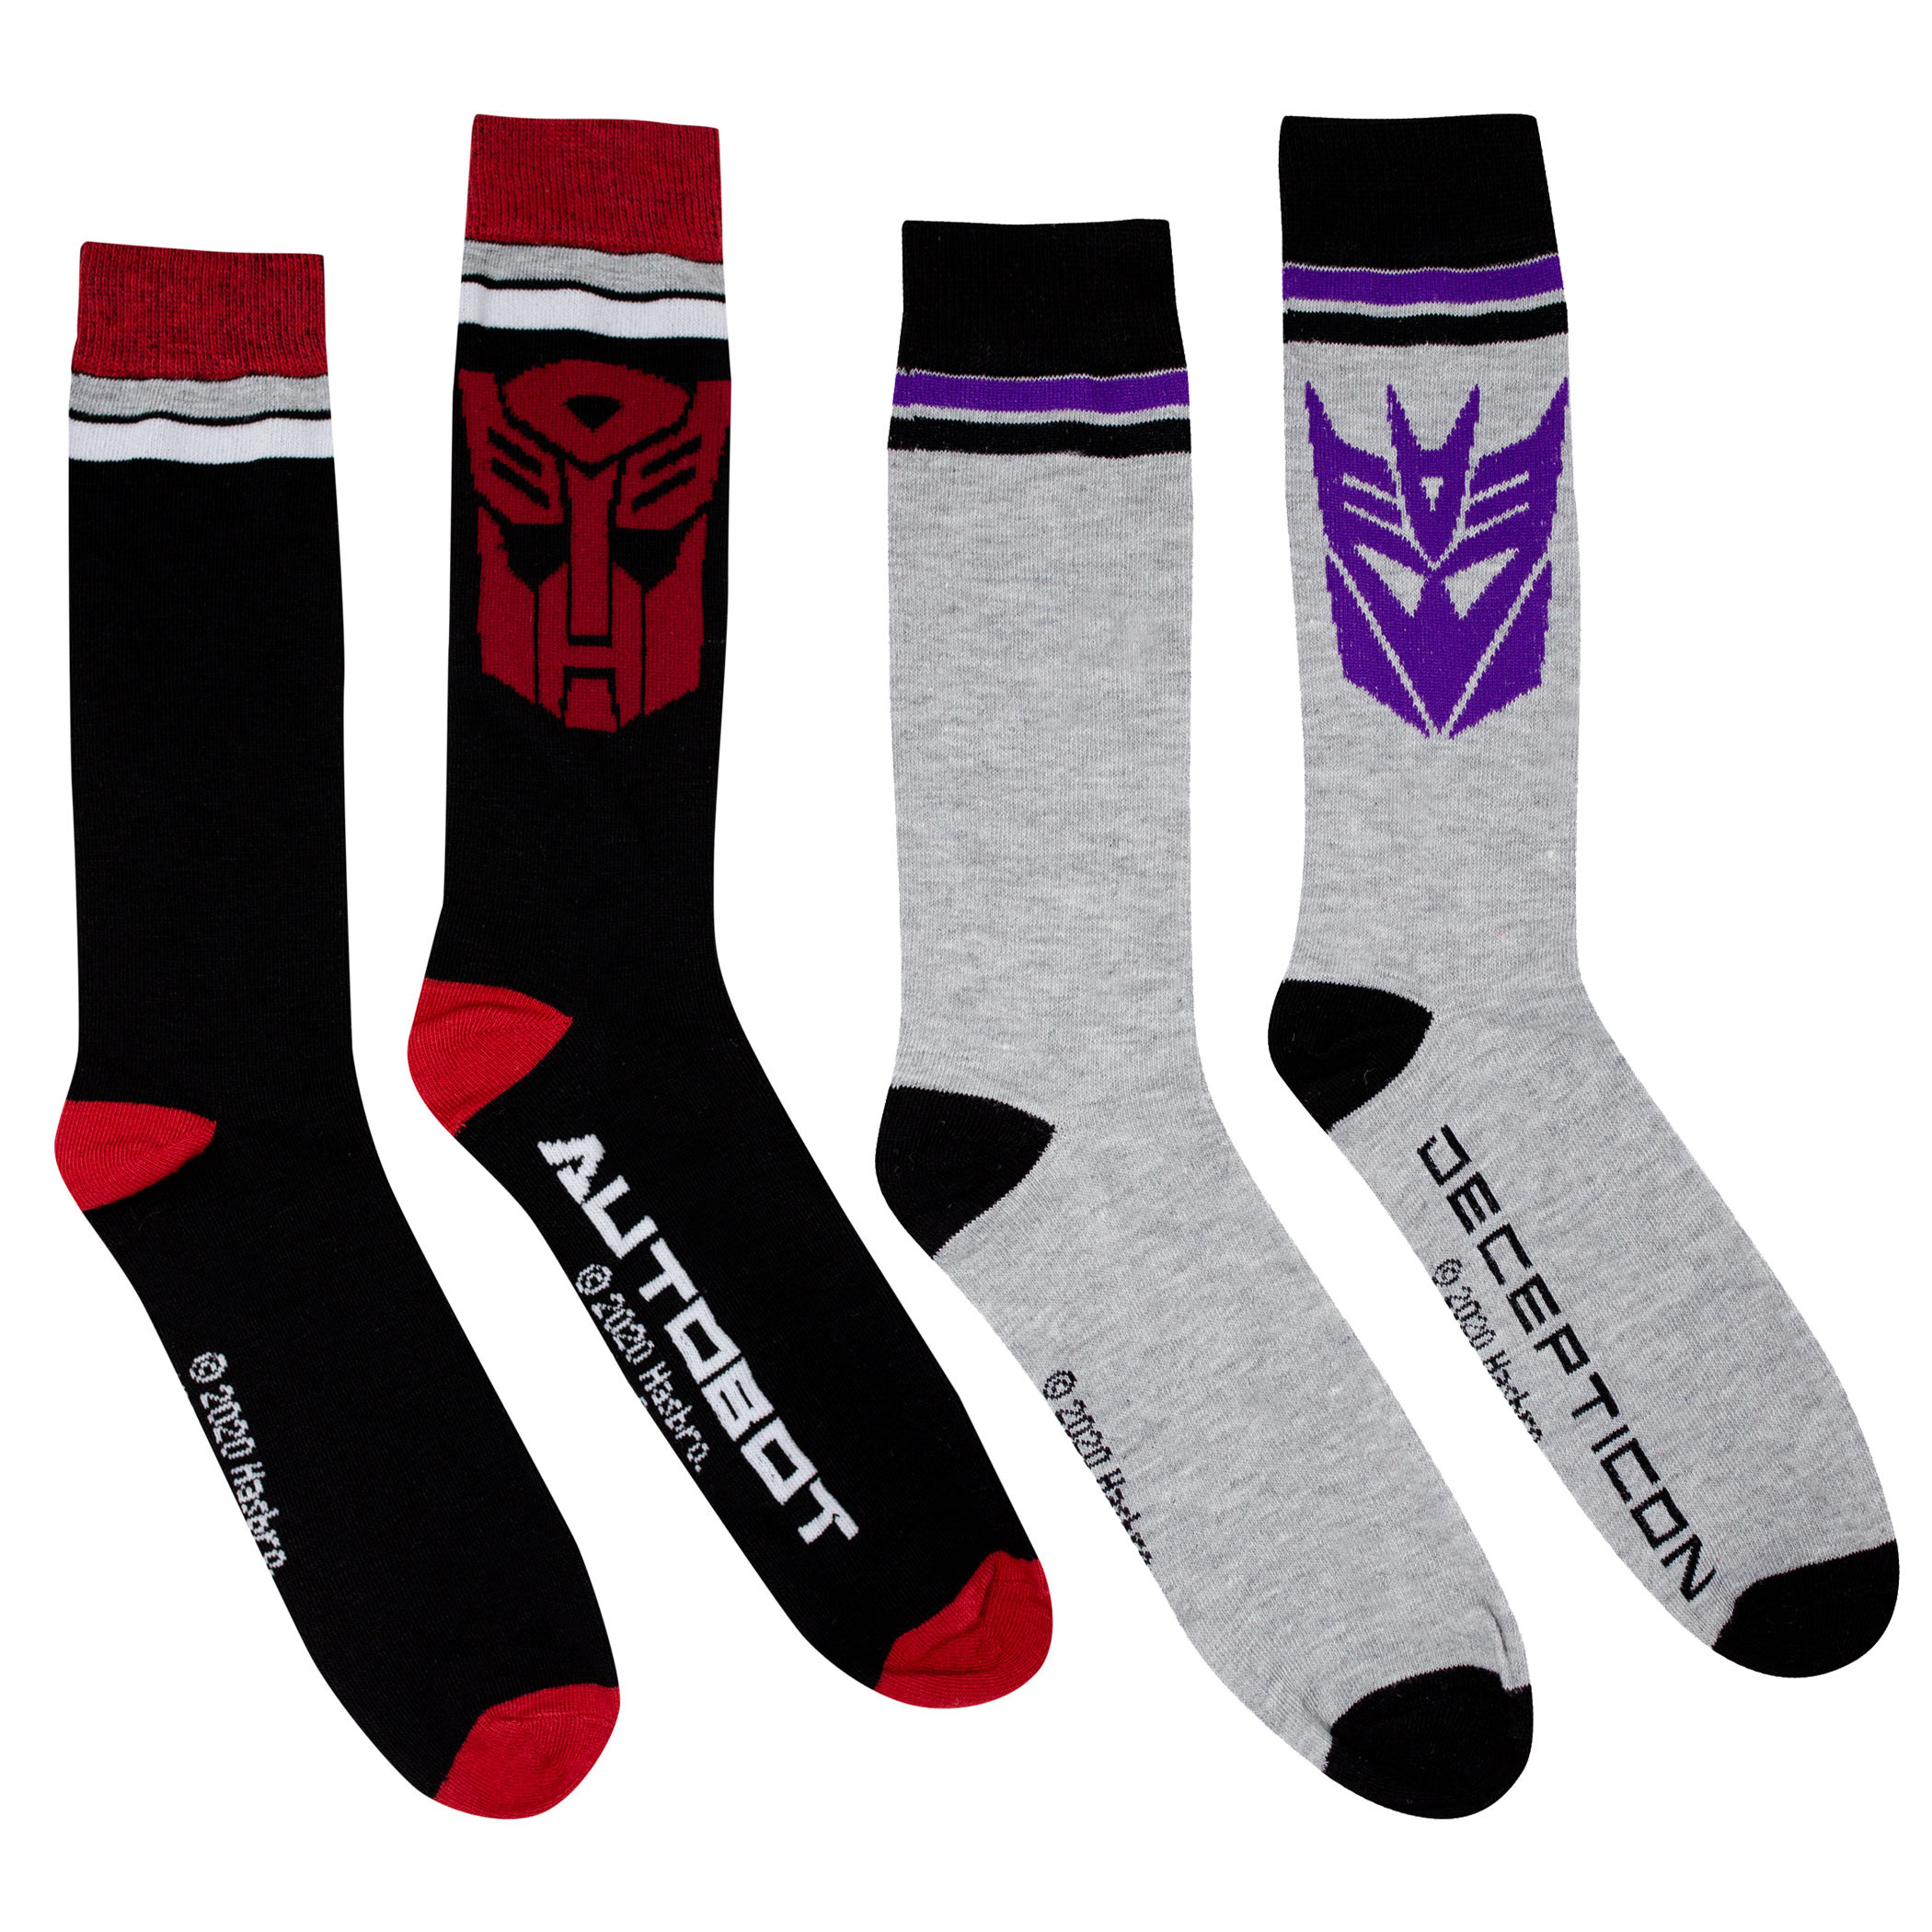 Transformers Decepticon and Autobot 2-Pack Socks